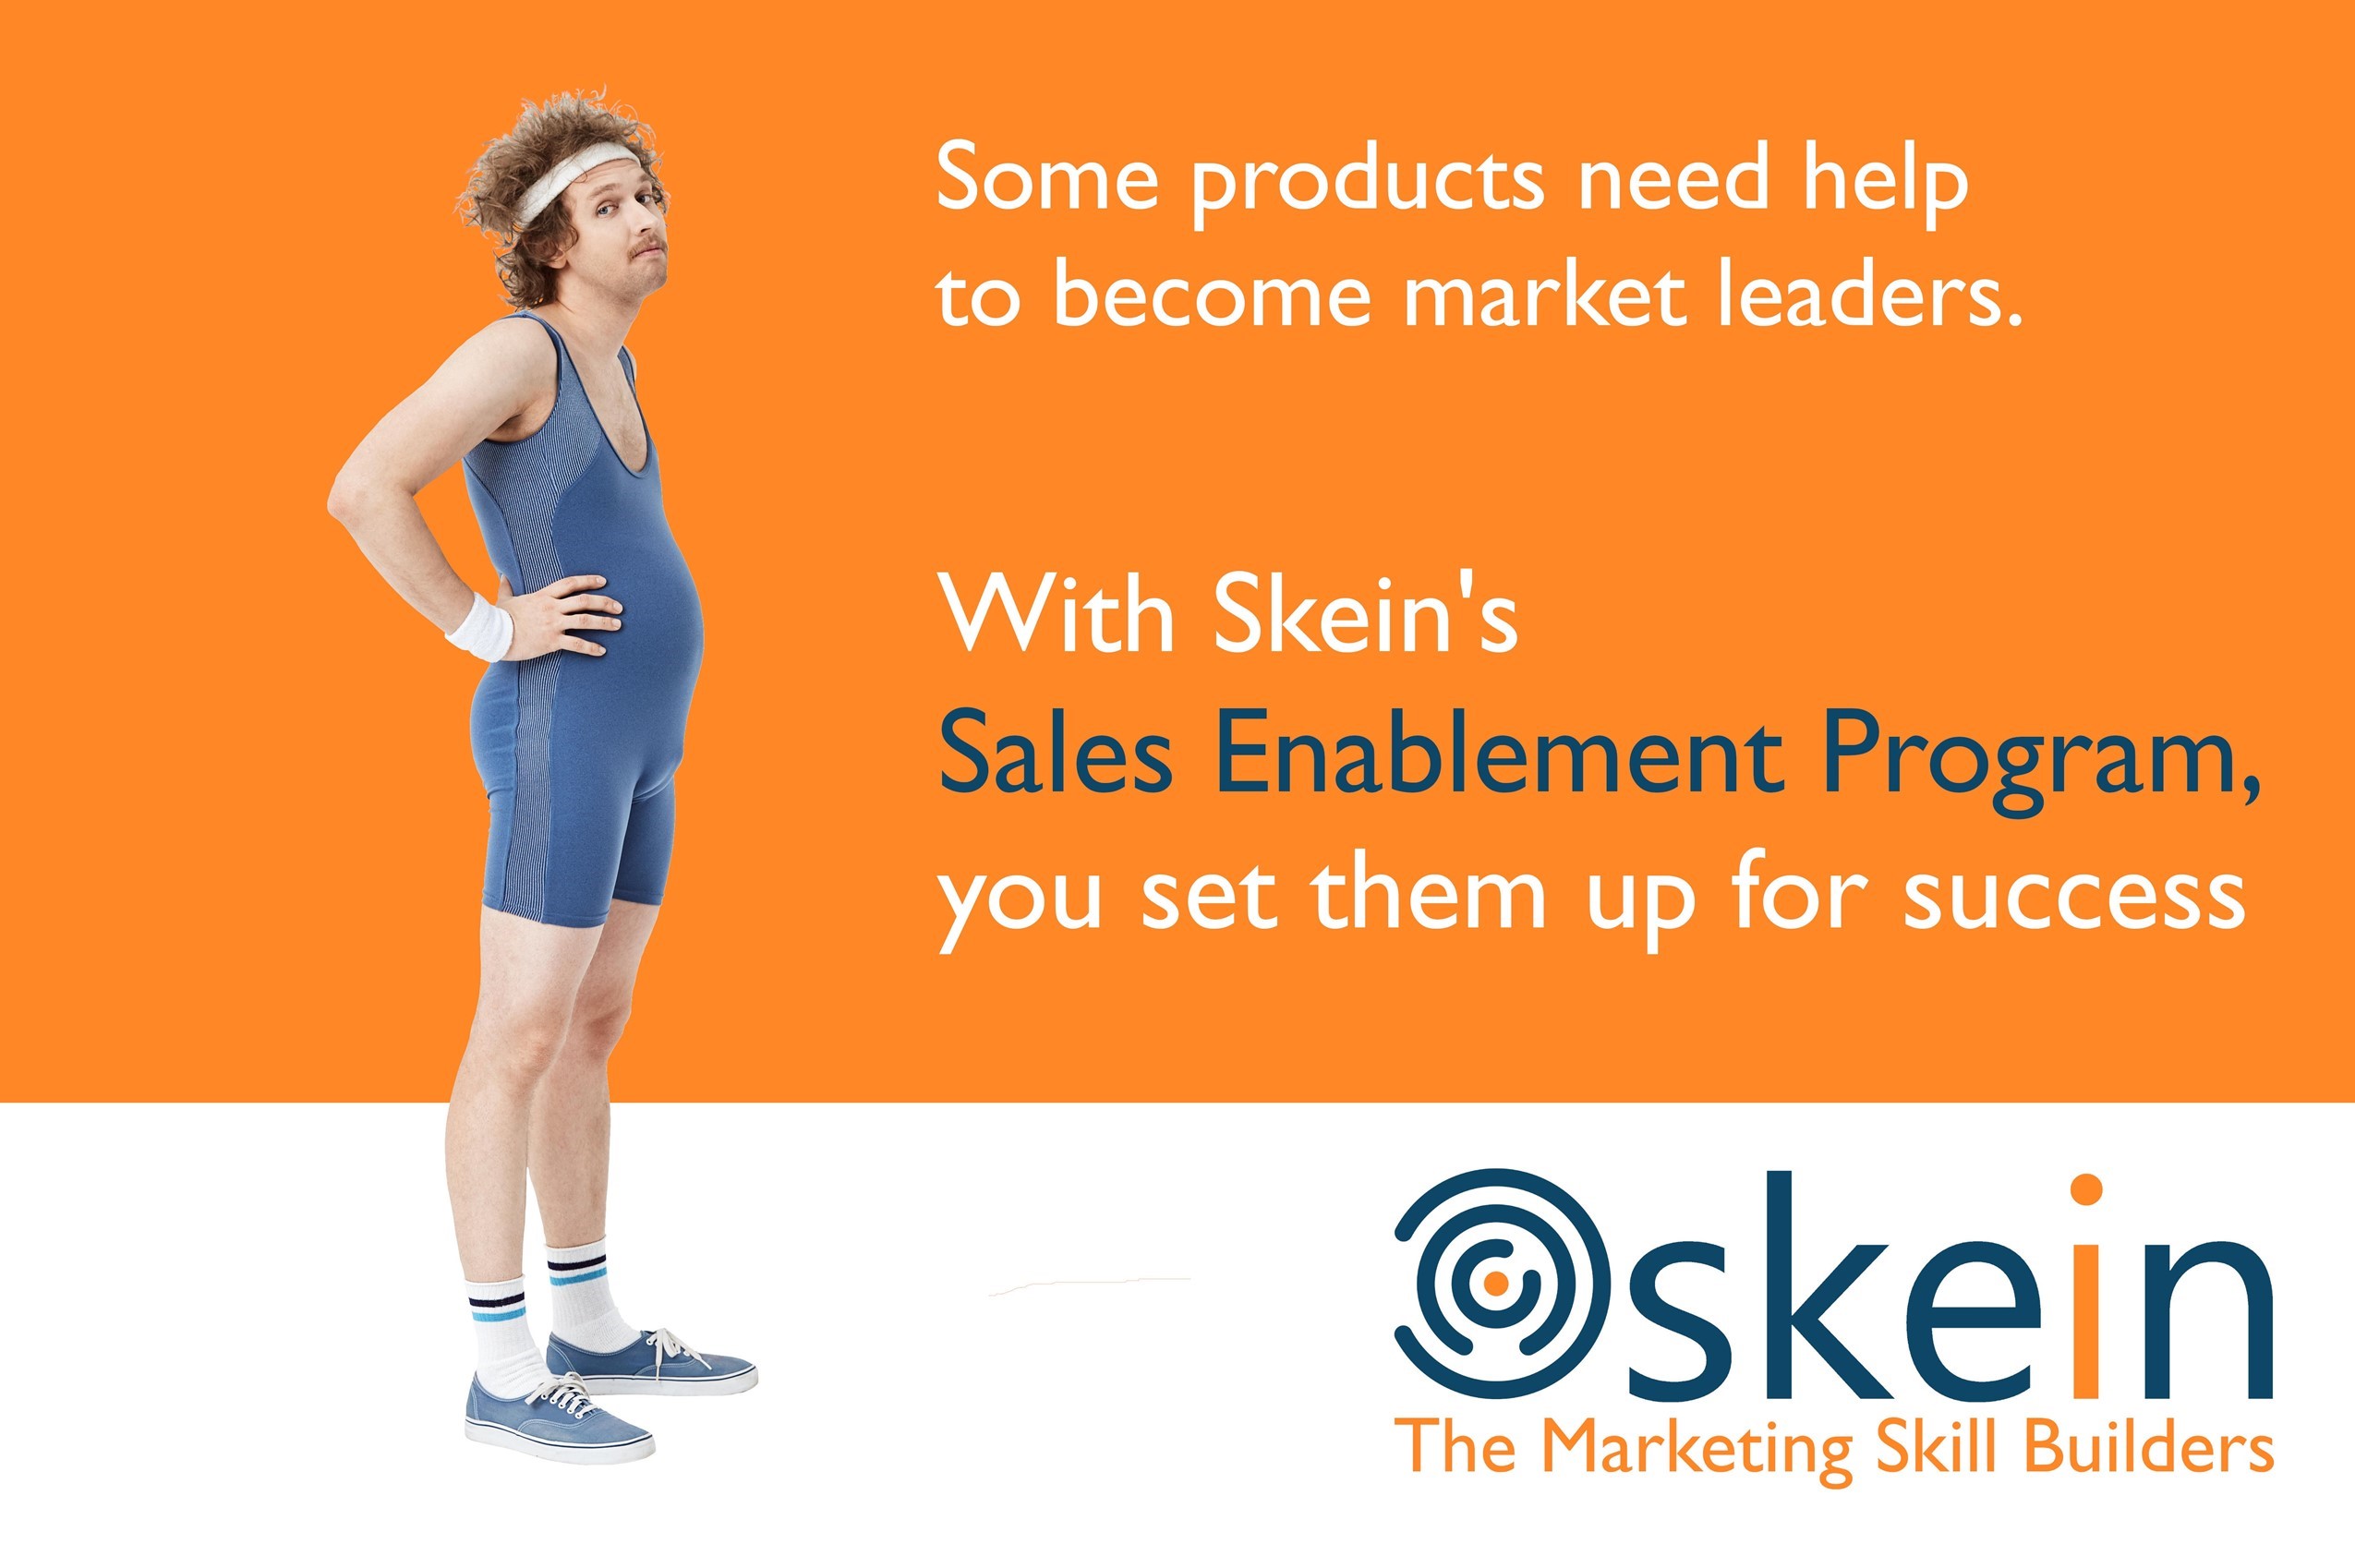 3 answers that lead to Sales Enablement